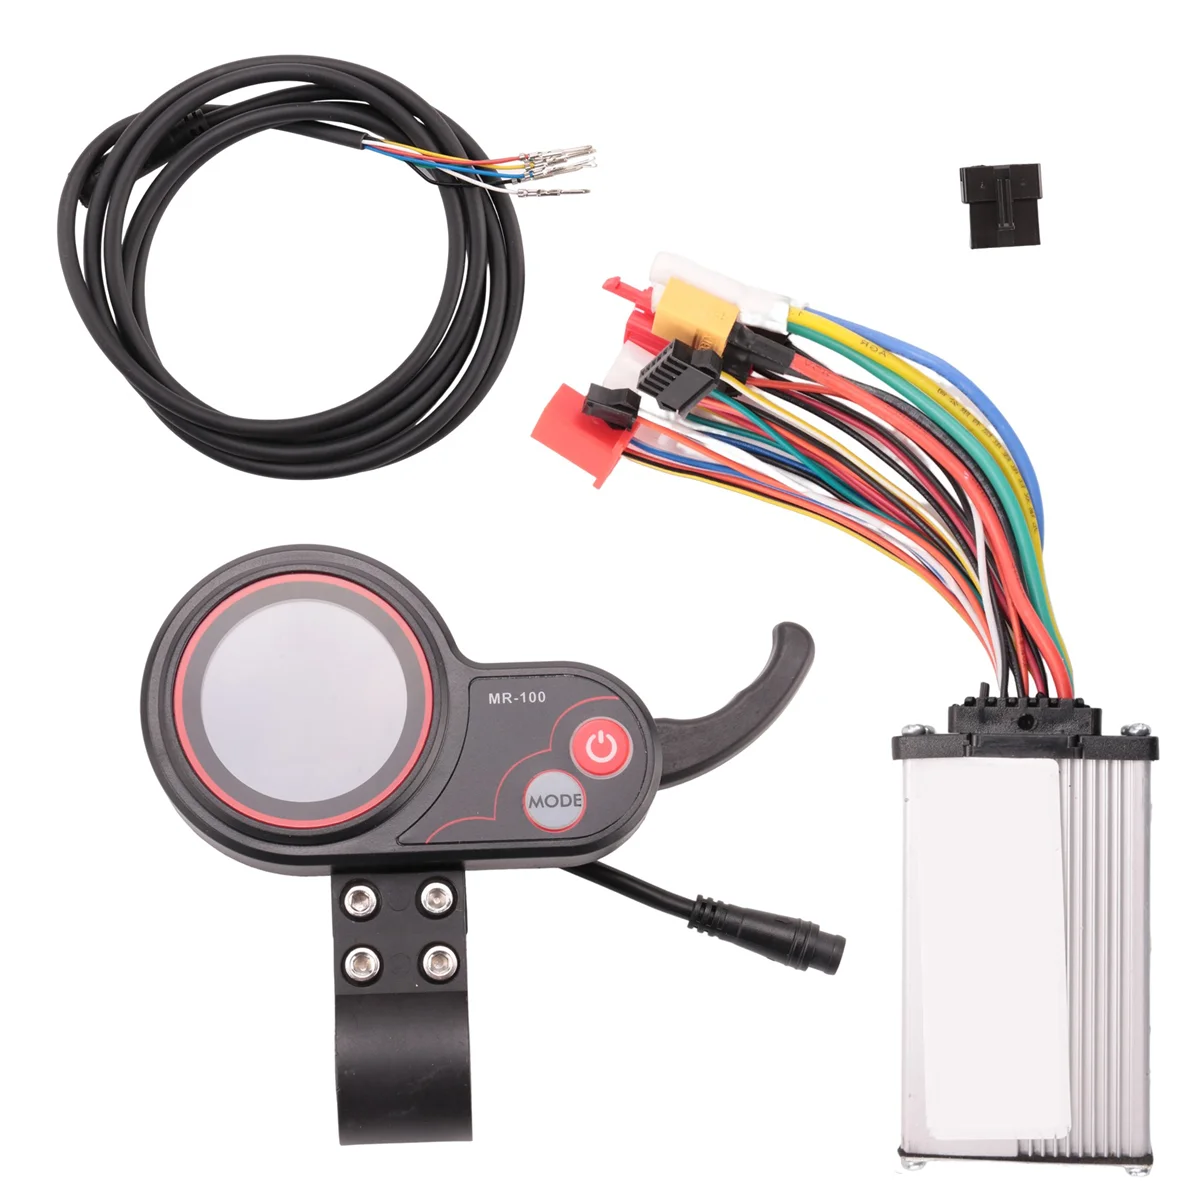 

36V 500W Controller MR-100 LCD Display Meter Dashboard Kit for KUGOO M4 Electric Scooter Accessories